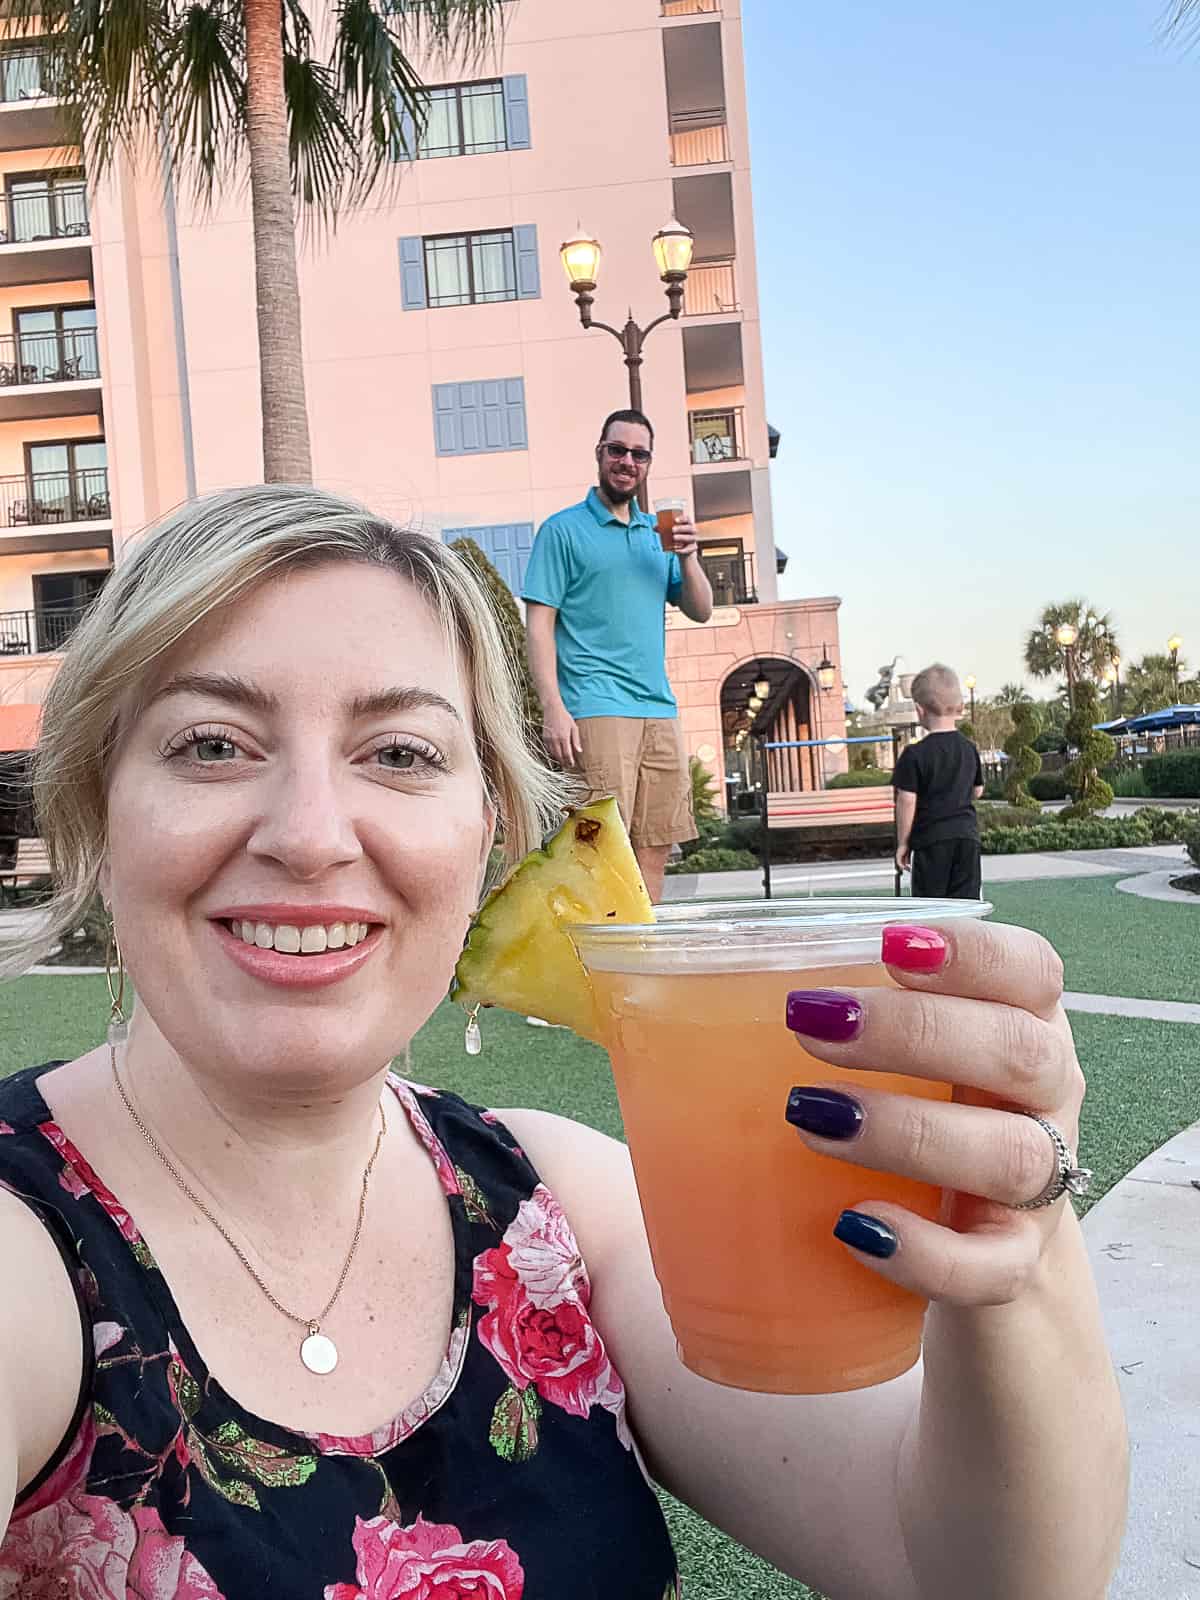 Riviera Resort Bar Hopping as example of Things To Do at Walt Disney World without a park ticket